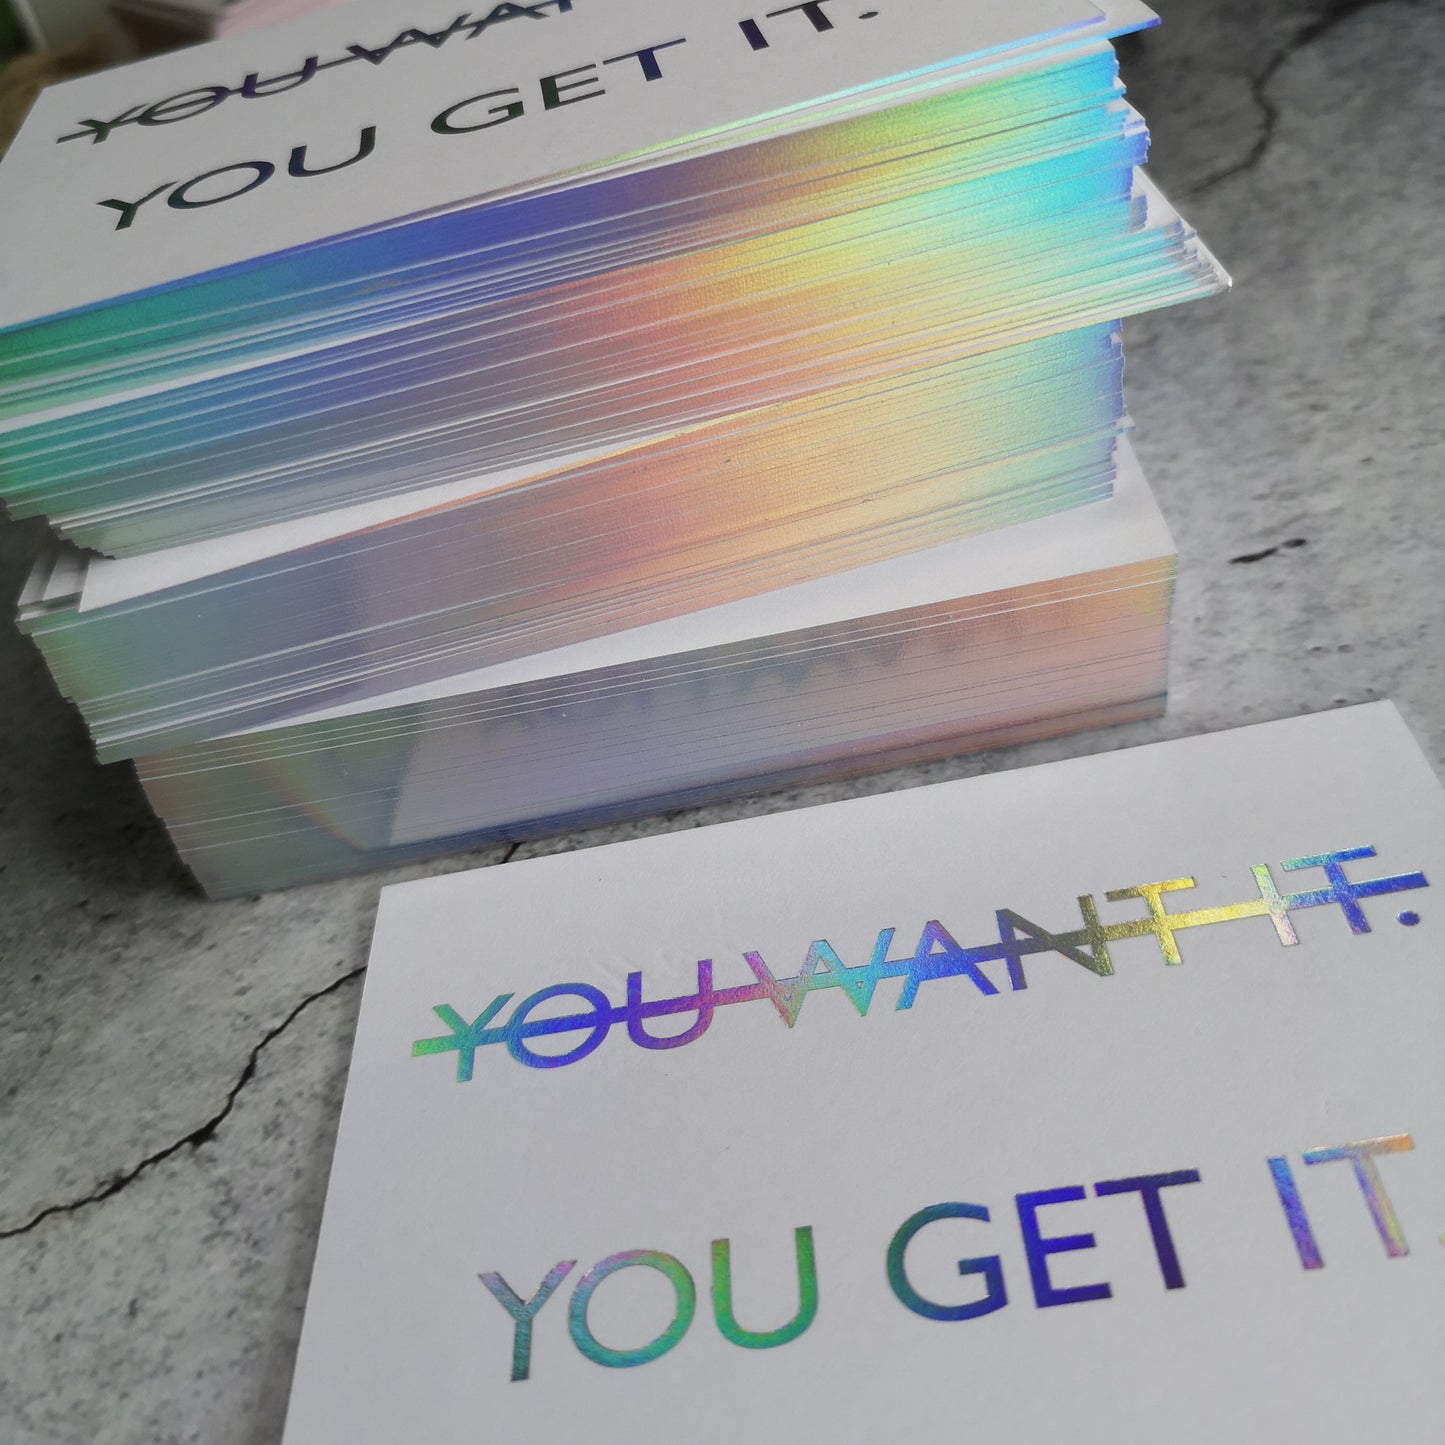 Holographic foiling business card printing